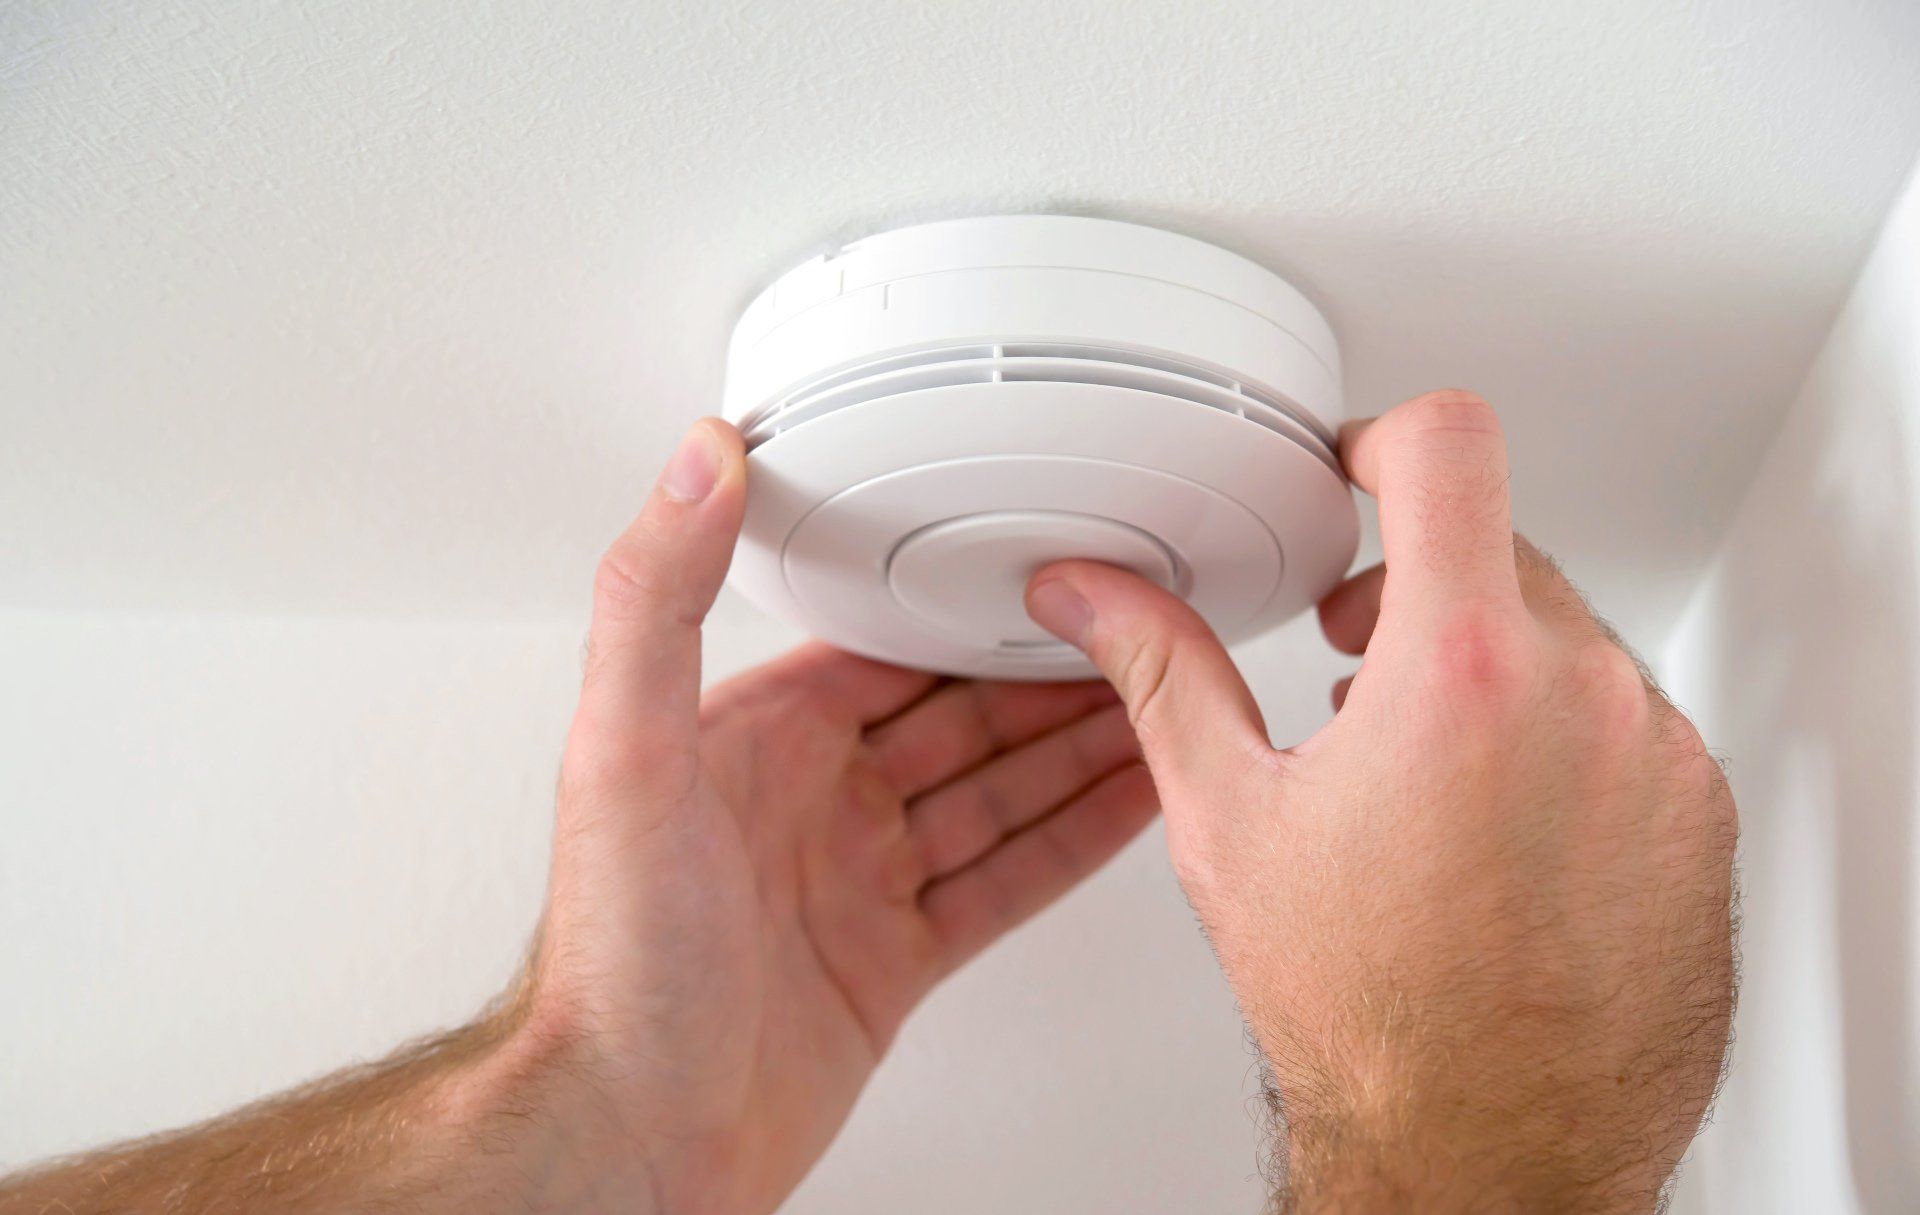 Man Installing Smoke Alarm - Air Conditioning Services in Mackay, QLD